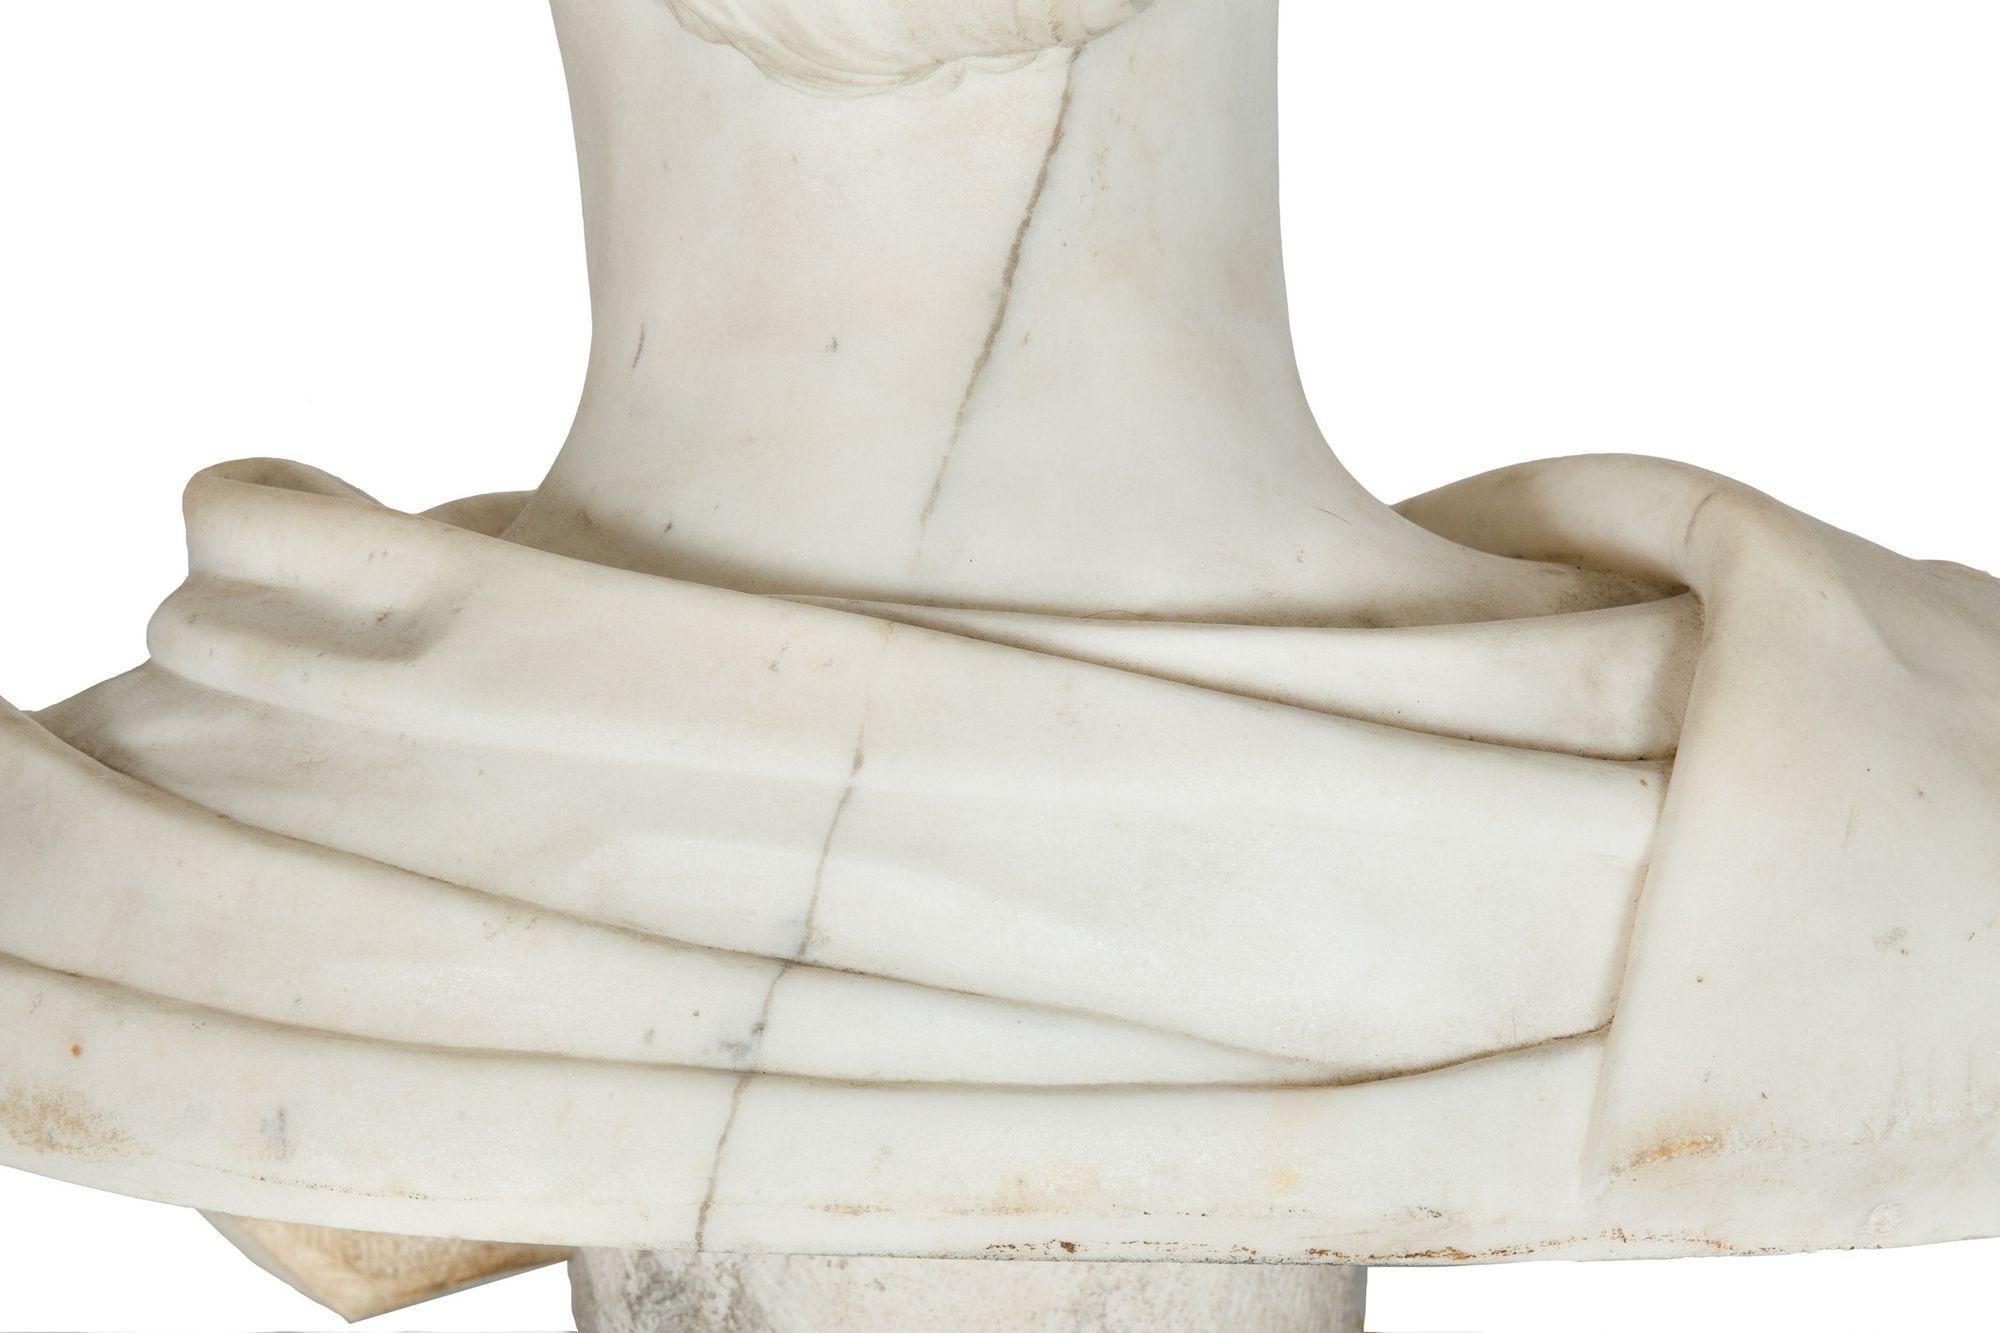 19th Century Carrara Marble Bust Sculpture of Classical Statesman For Sale 7